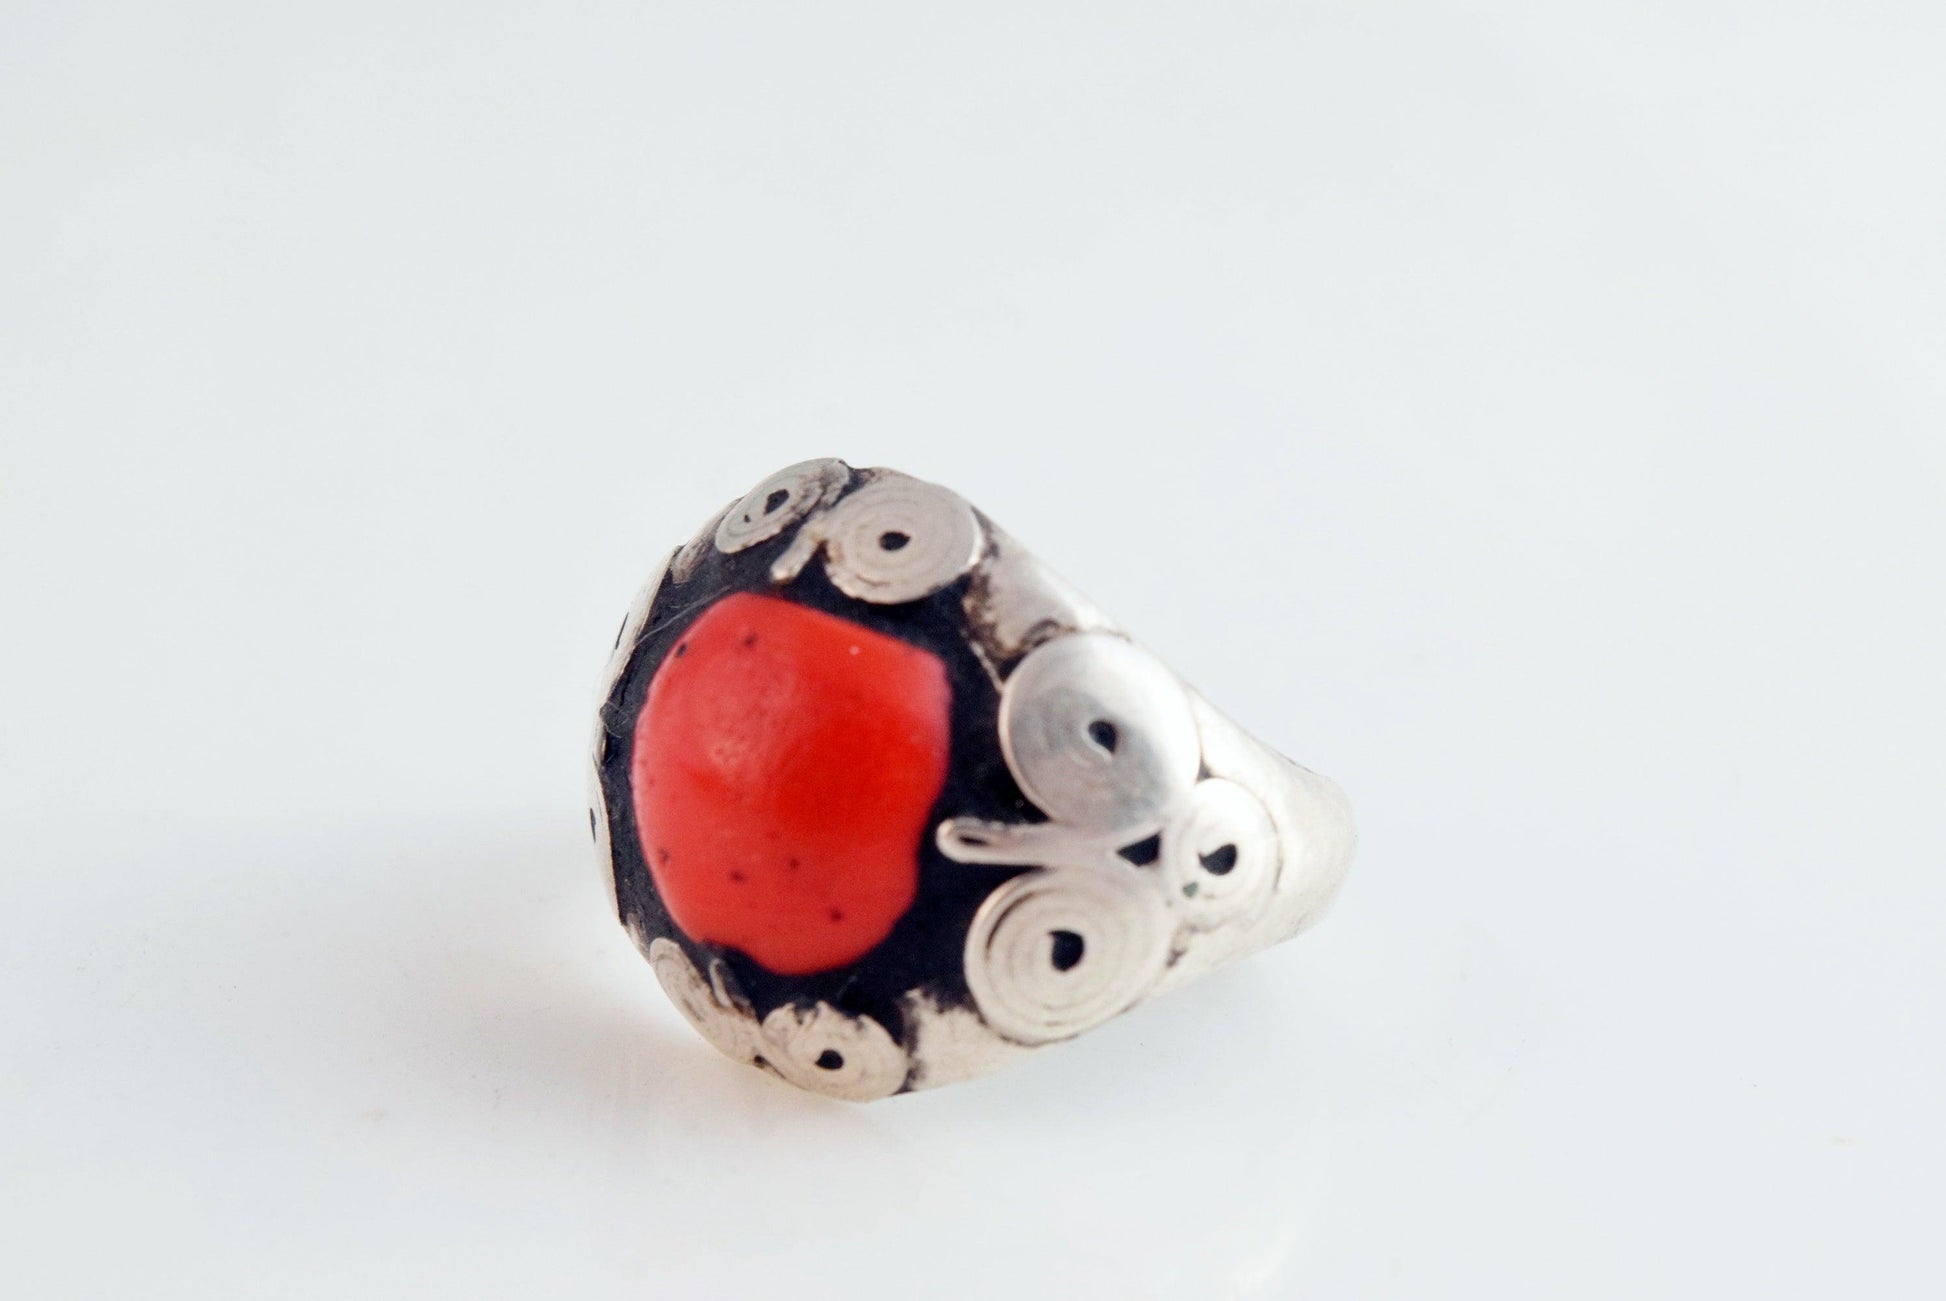 Vintage Afghani Silver Ring with Red Stone - Anteeka